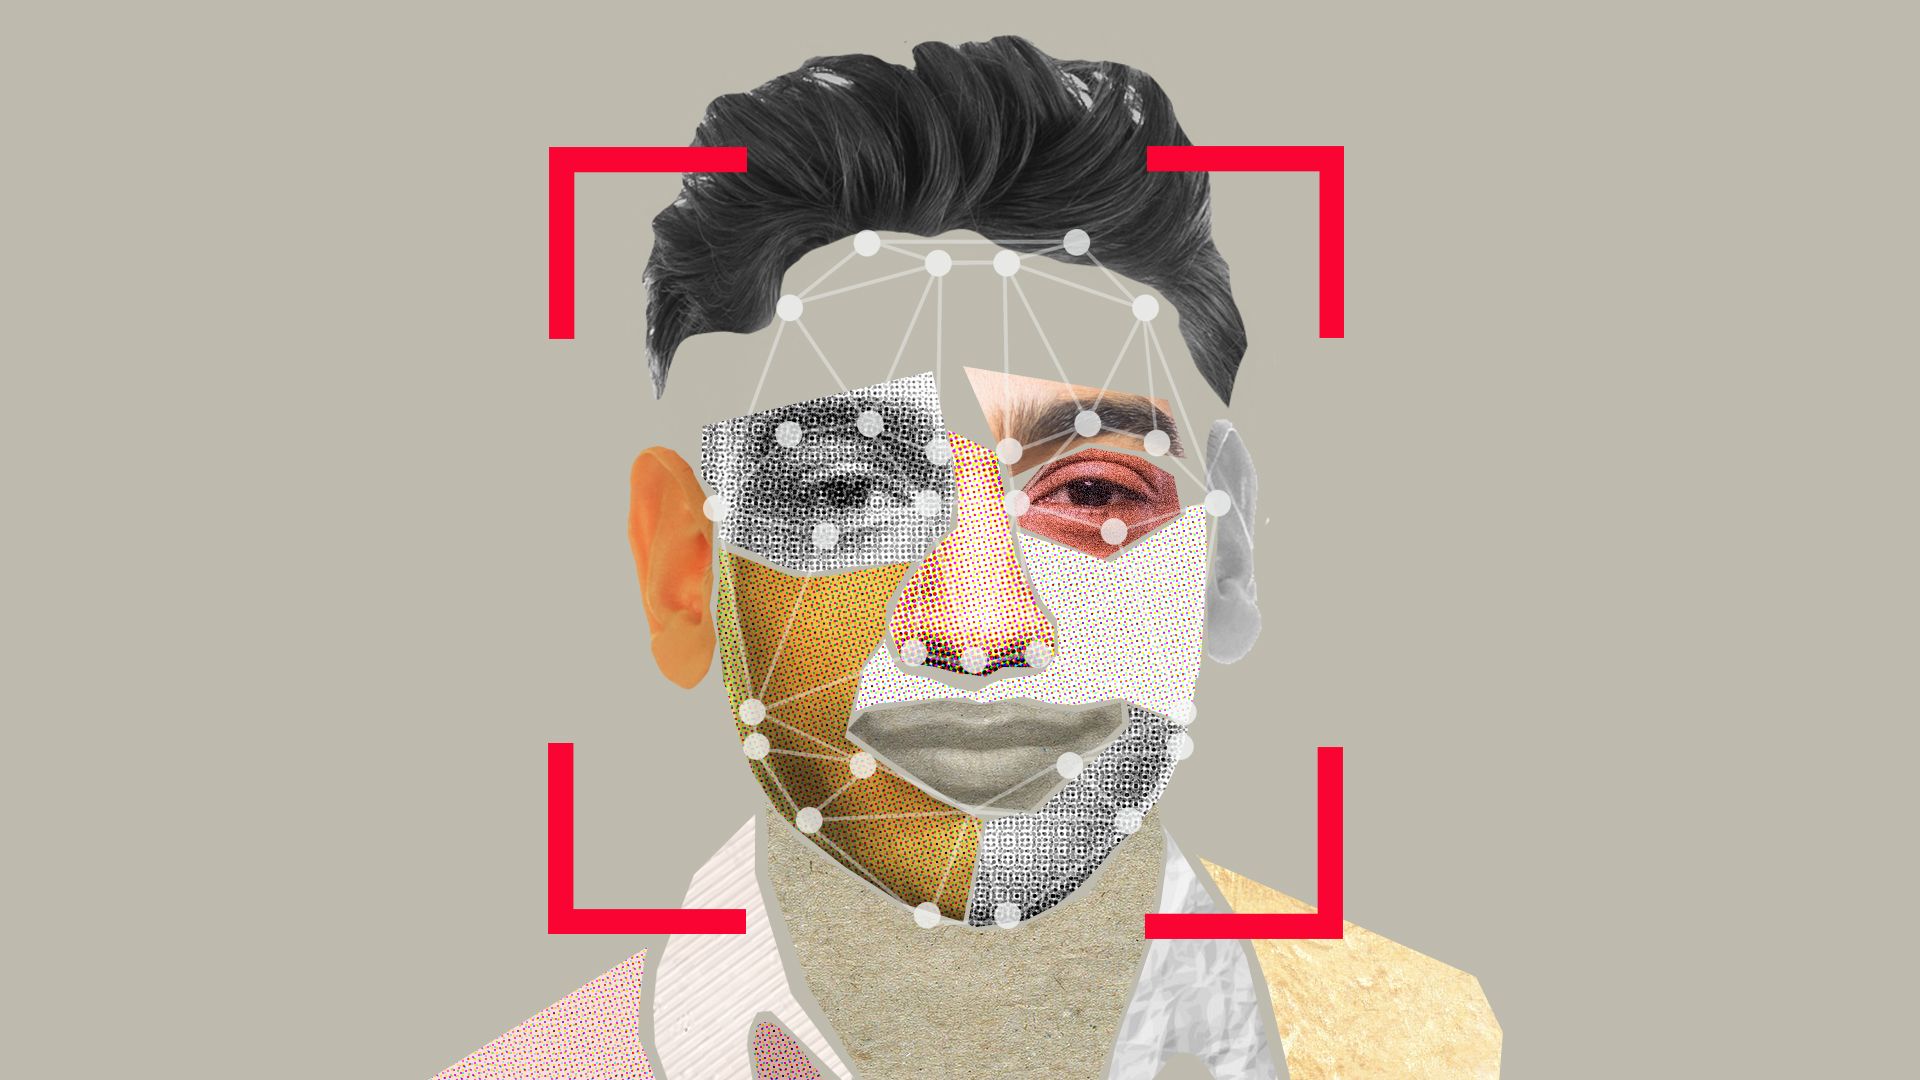 Illustration of a person with different skin tones in with a red targeting box around their face